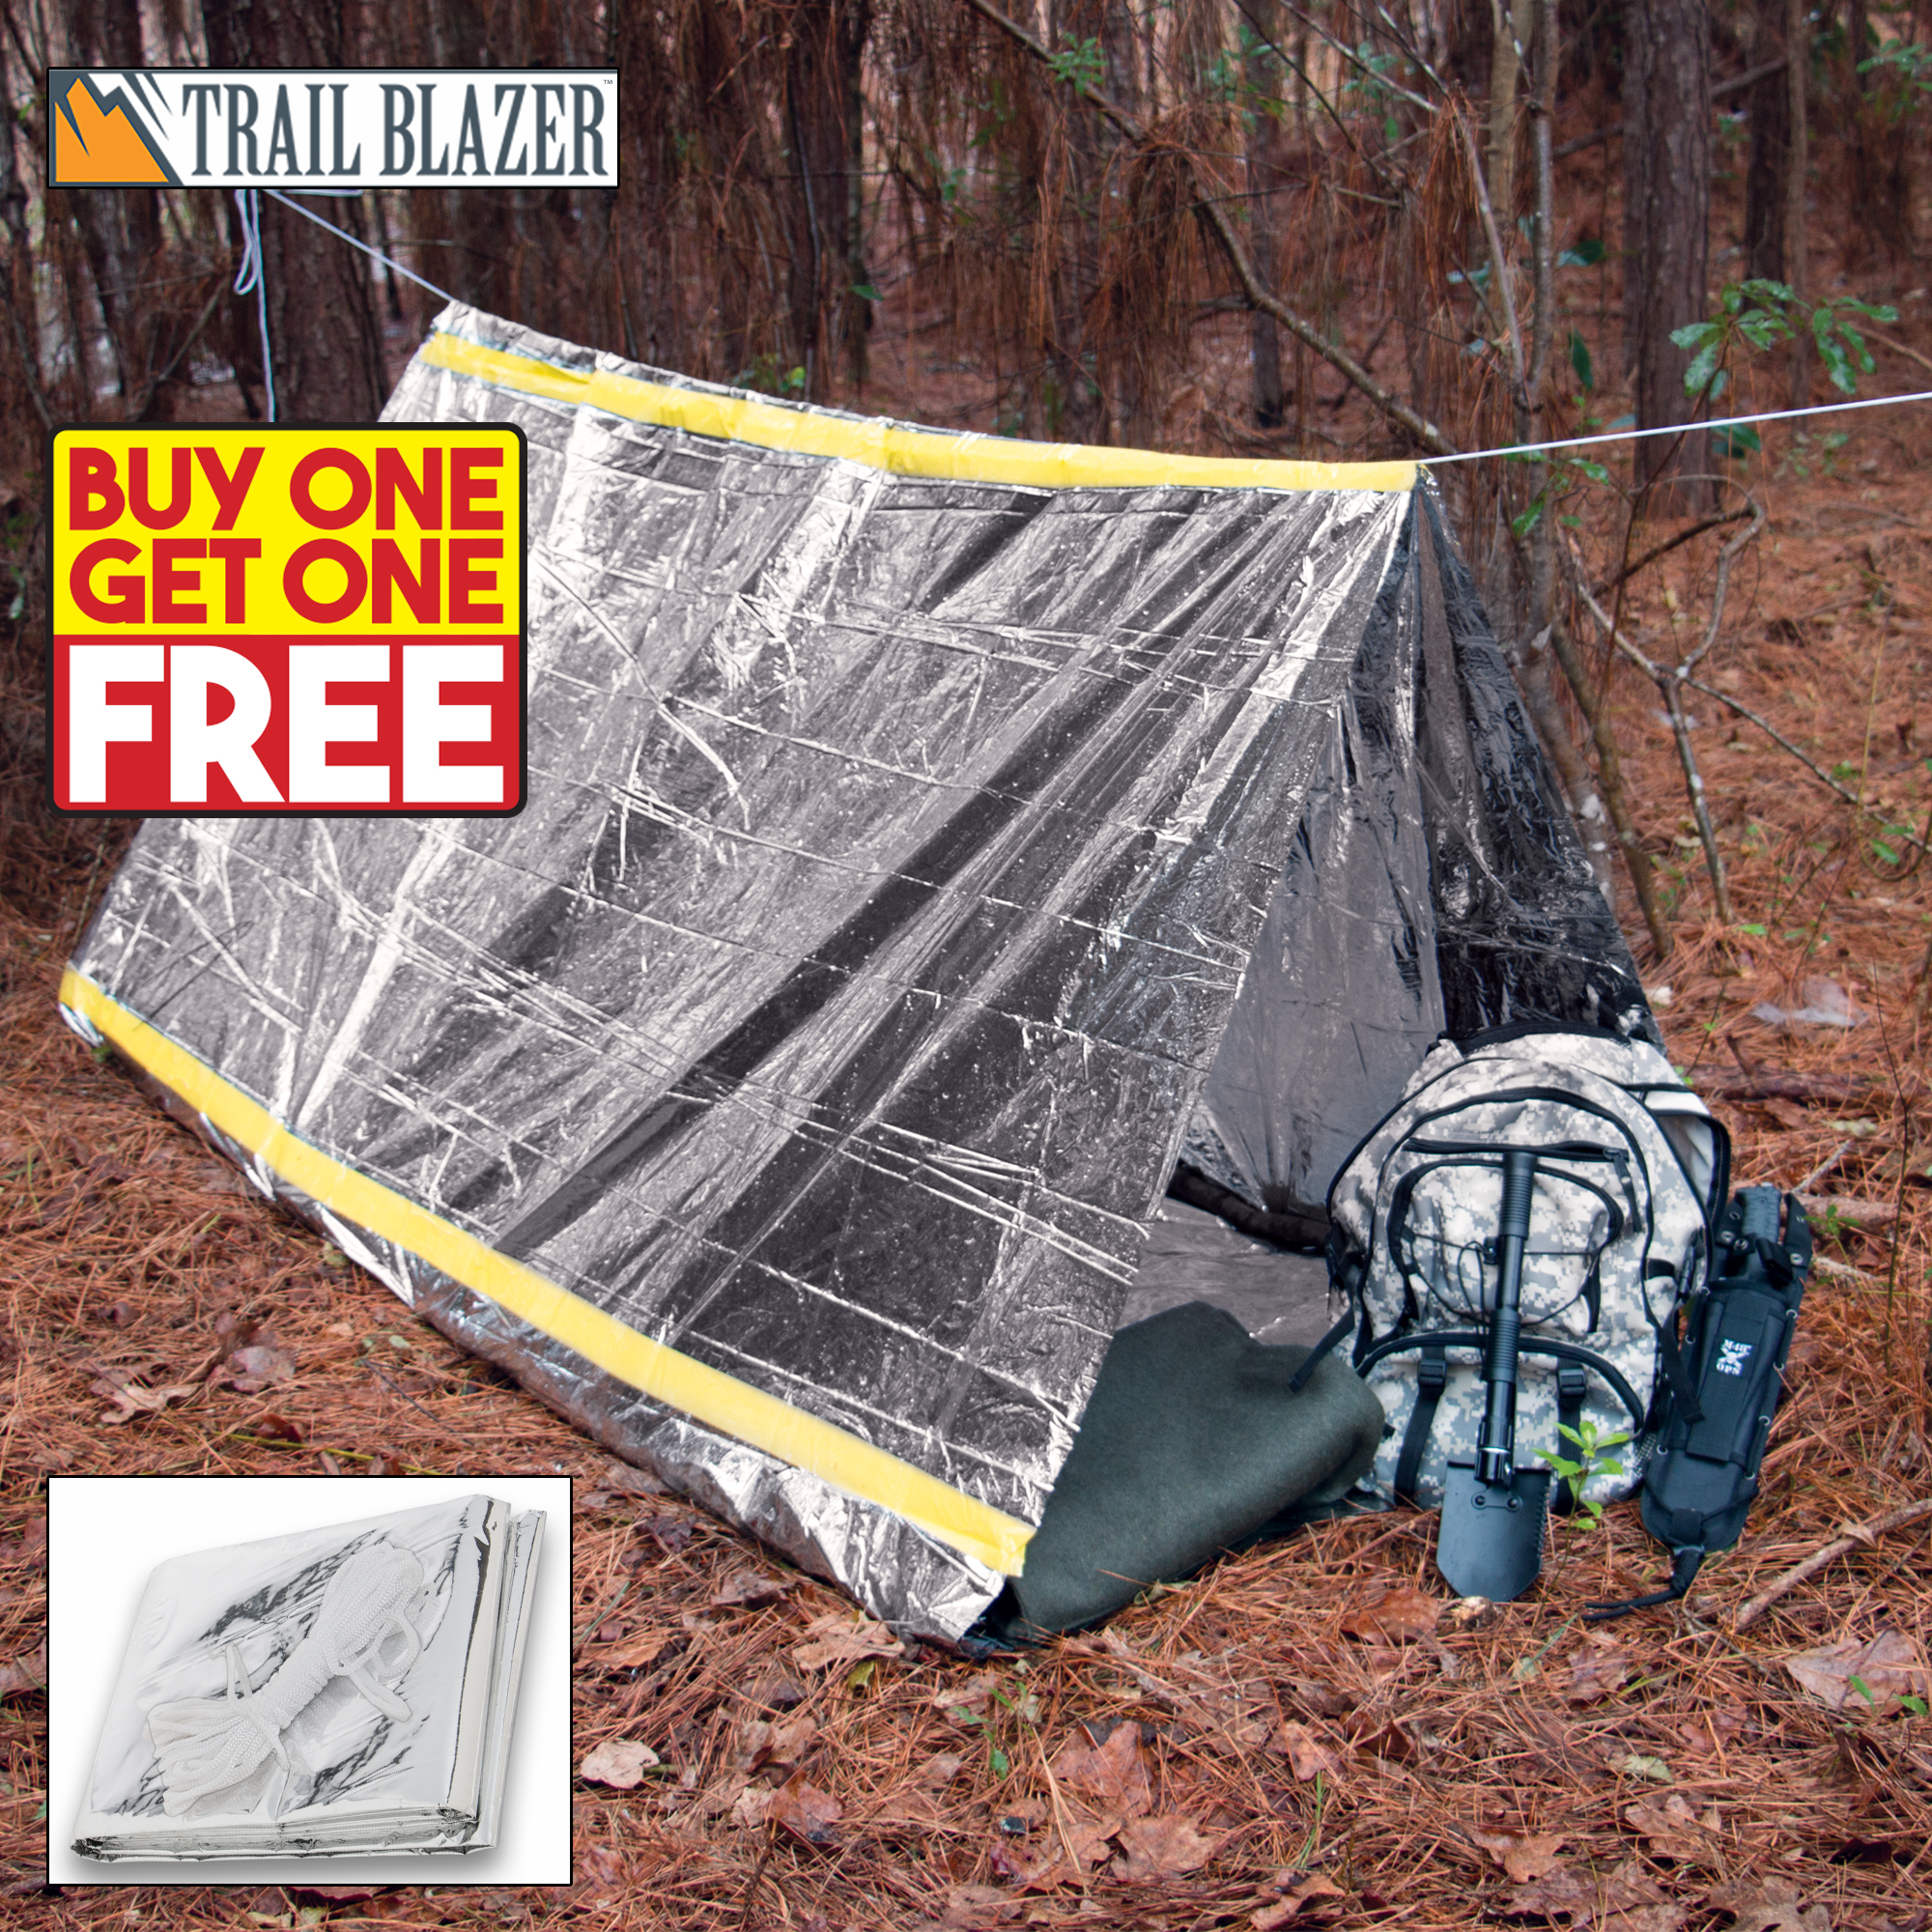 Trailblazer Emergency Rescue Tent - Instant Shelter / Protection from Weather, Other Dangerous Conditions - Lightweight, Durable, Compact - Includes 20' Cord - Fits 2+ Persons - 8' x 5' - BOGO